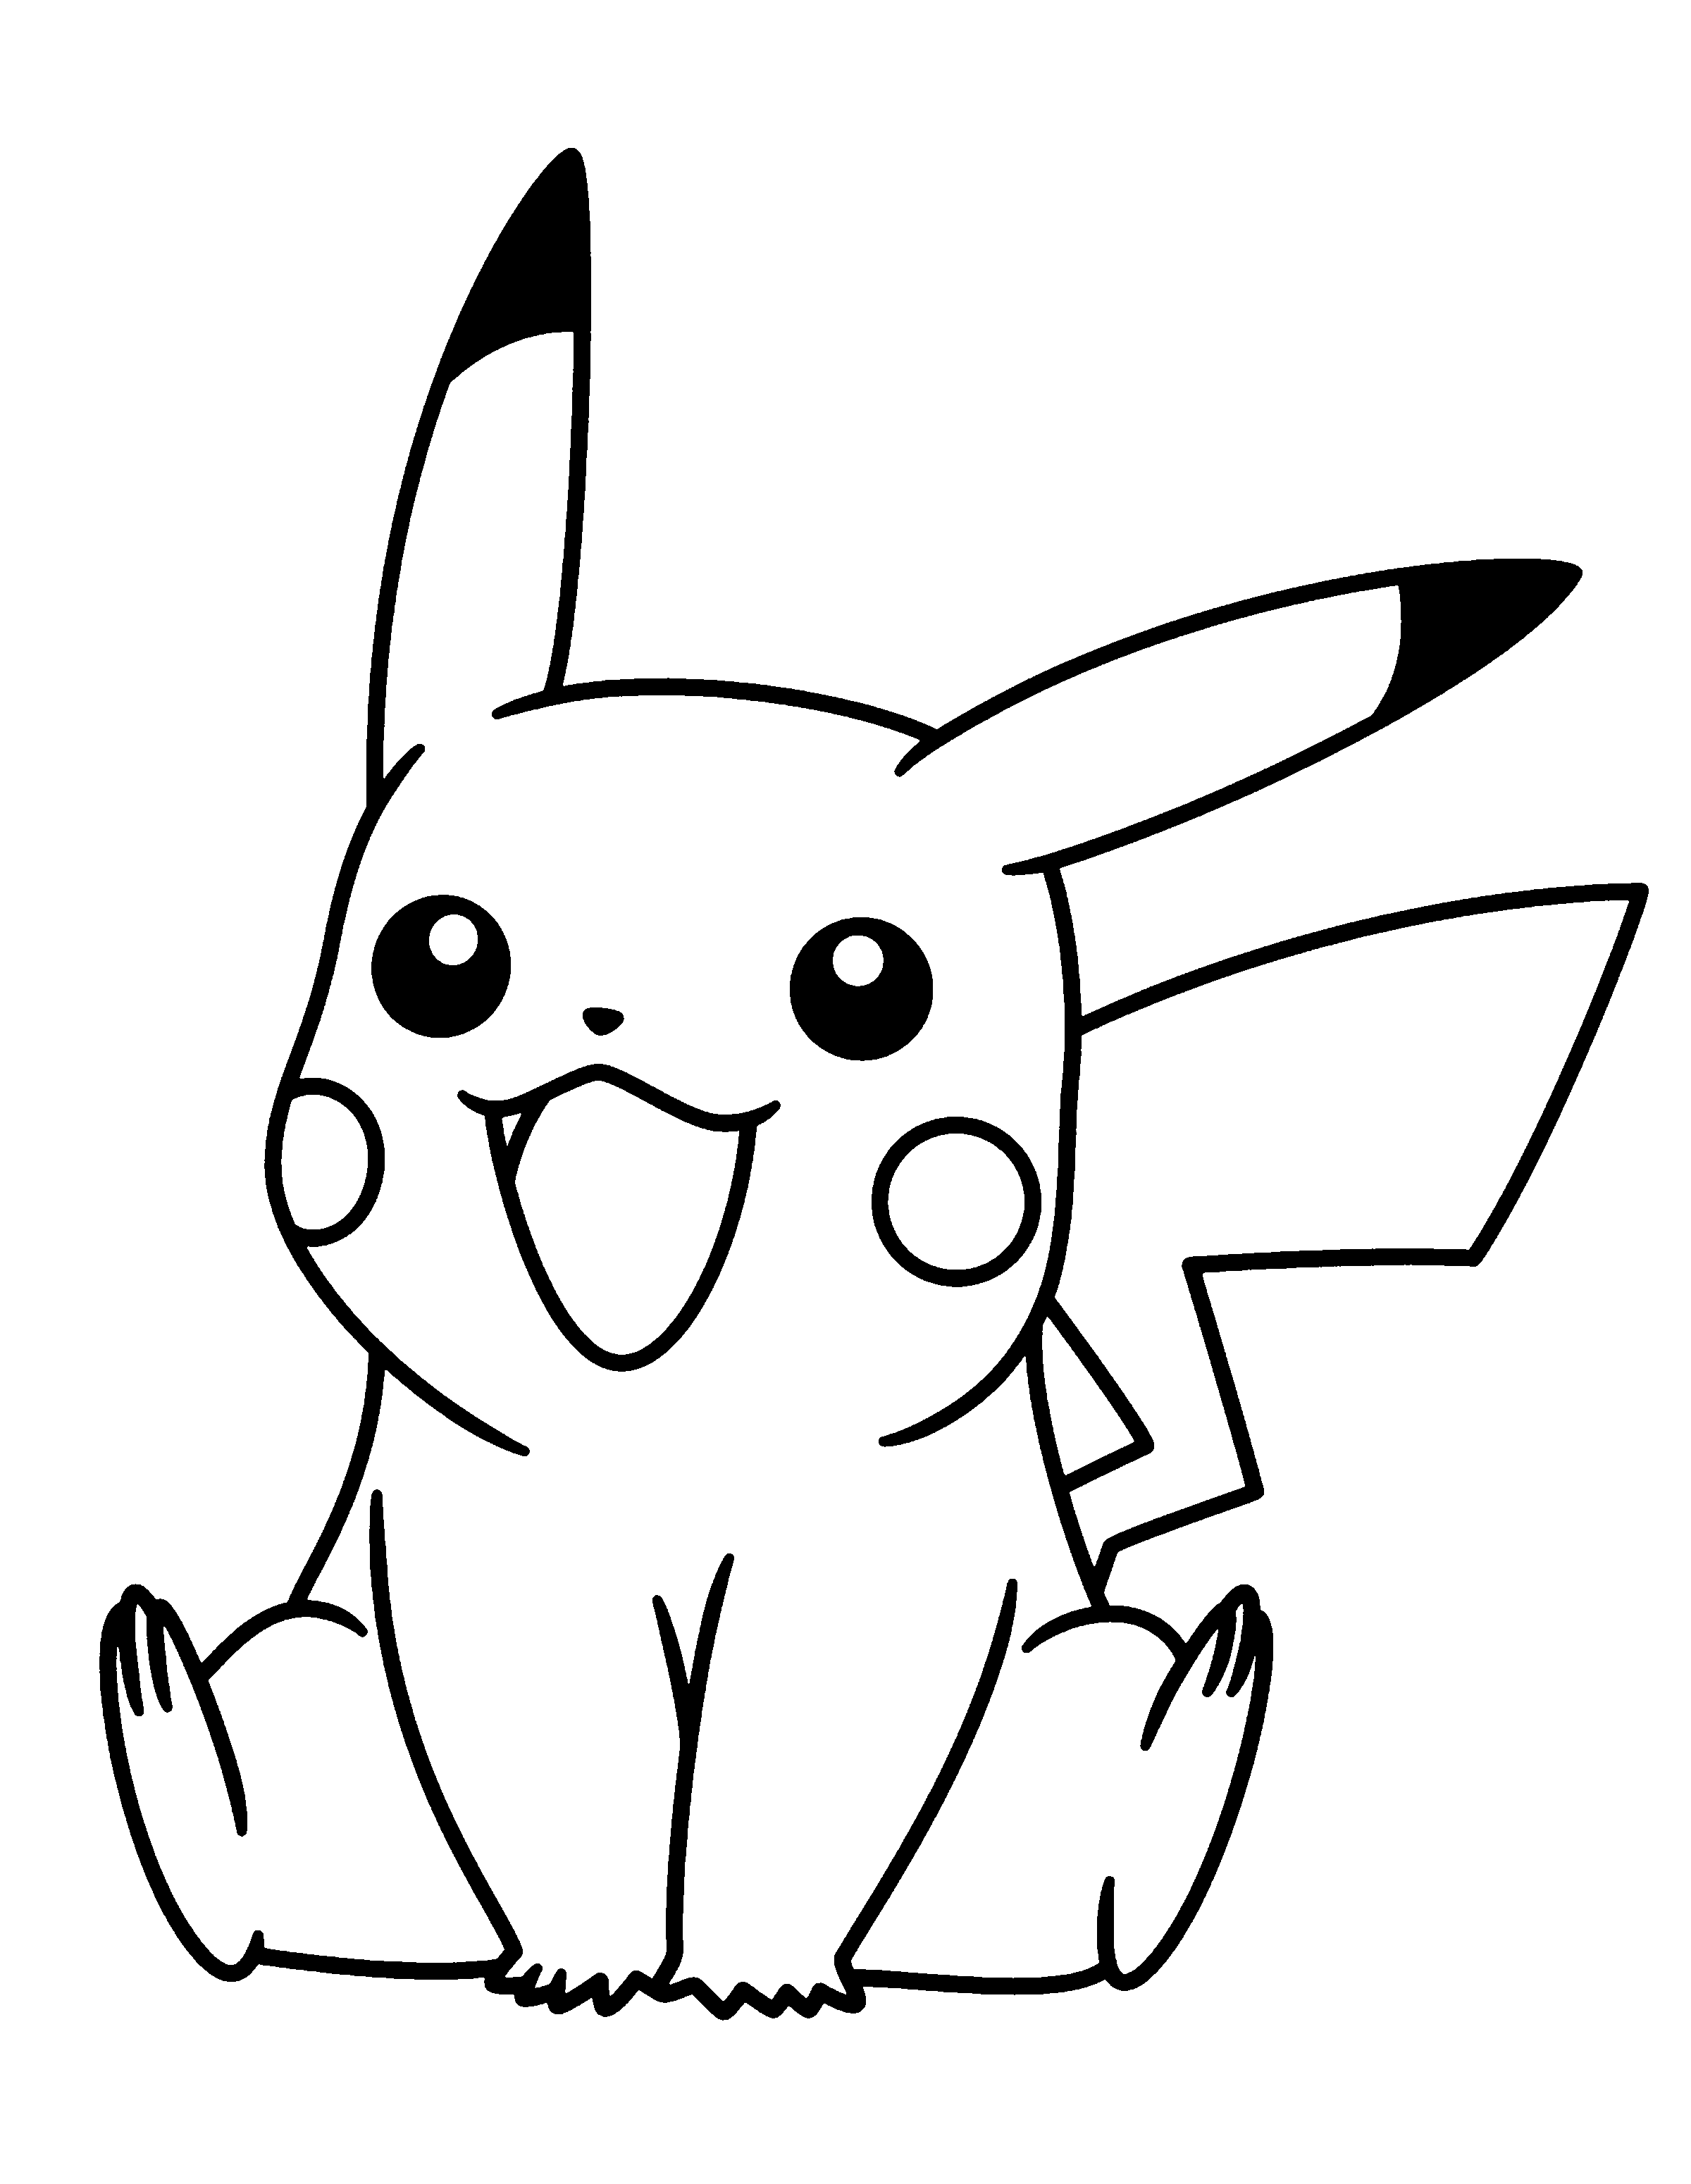 Drawing Pokemon 20 Cartoons – Printable coloring pages